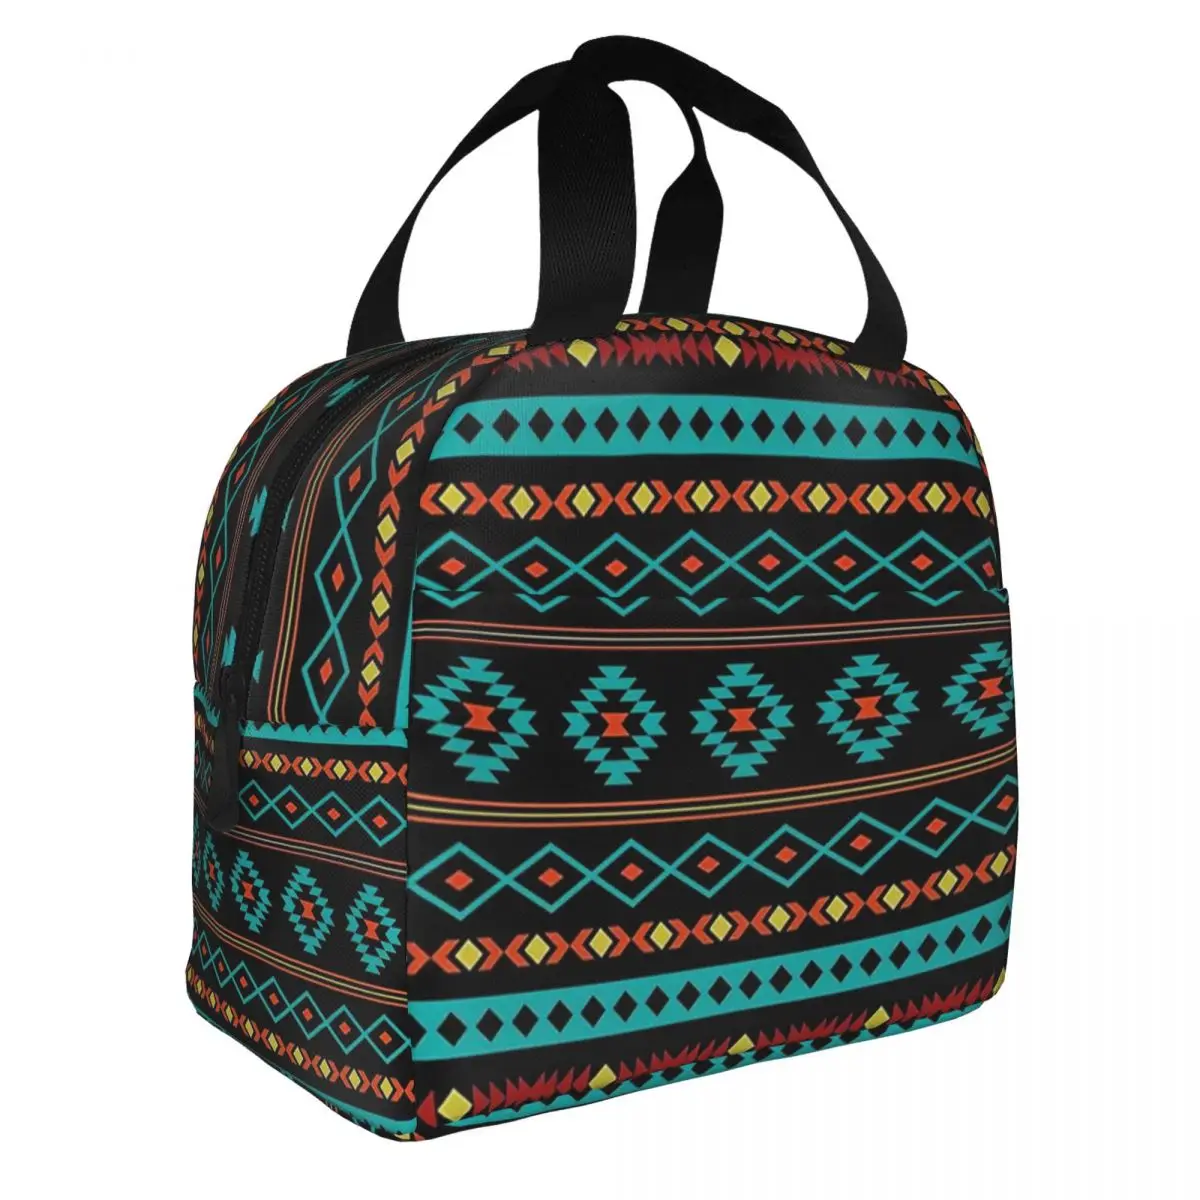 Aztec Teal Reds Yellow Black Mixed Motifs Pattern Lunch Bento Bags Portable Aluminum Foil thickened Thermal Cloth Lunch Bag